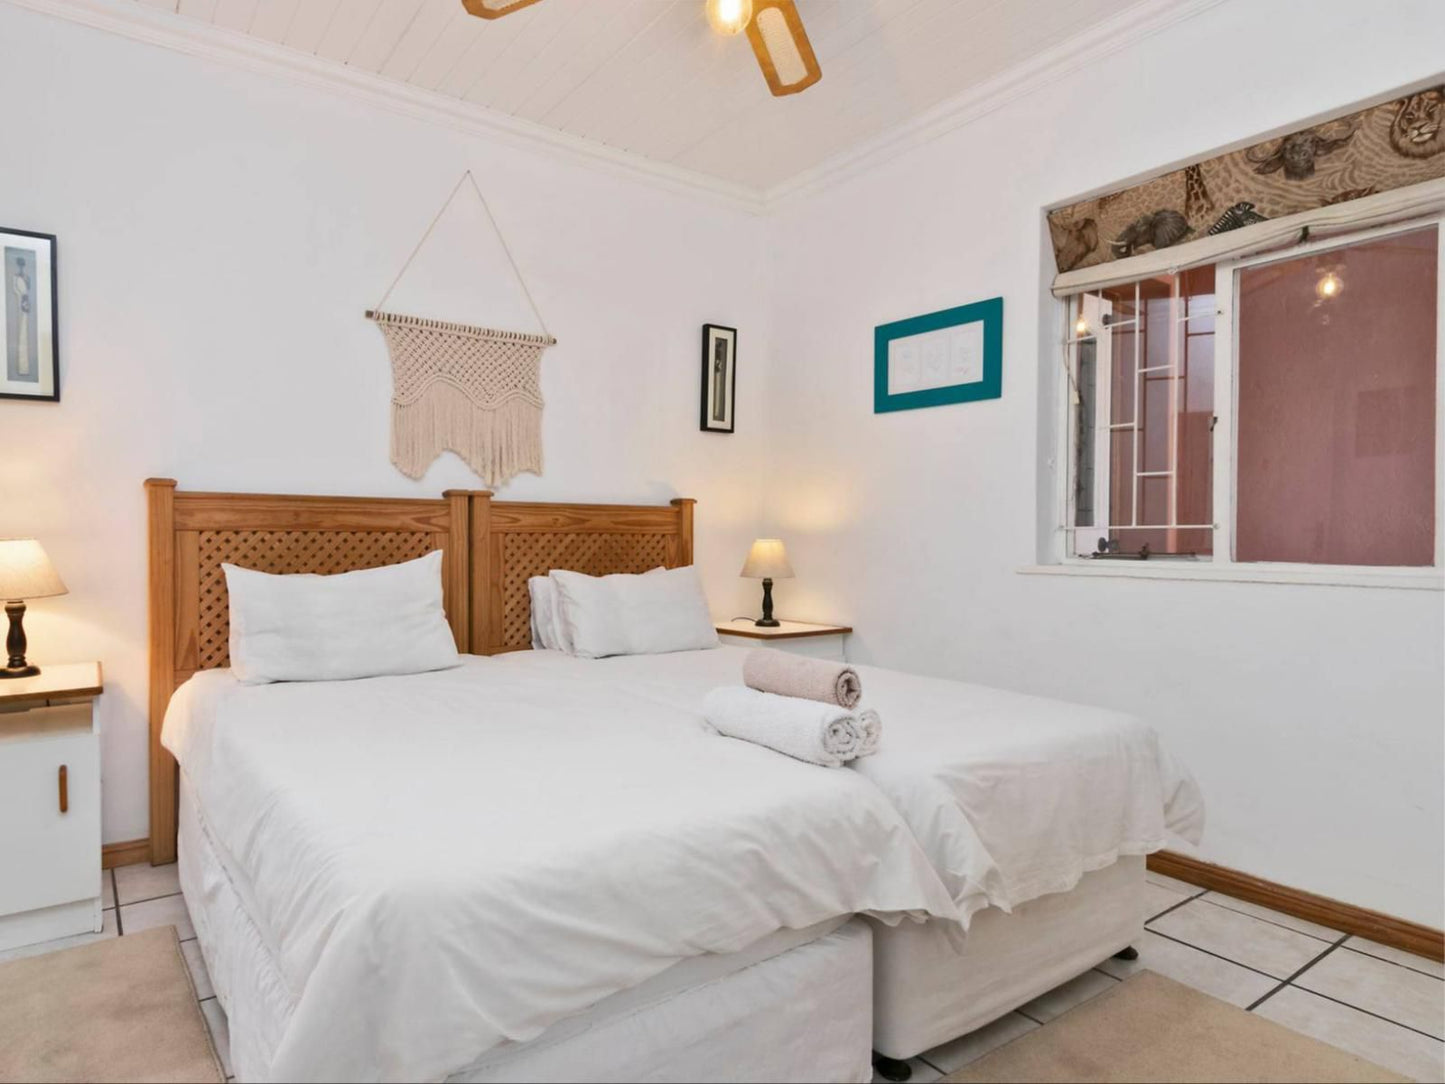 The Bohemian Guesthouse Century City Cape Town Western Cape South Africa Bedroom